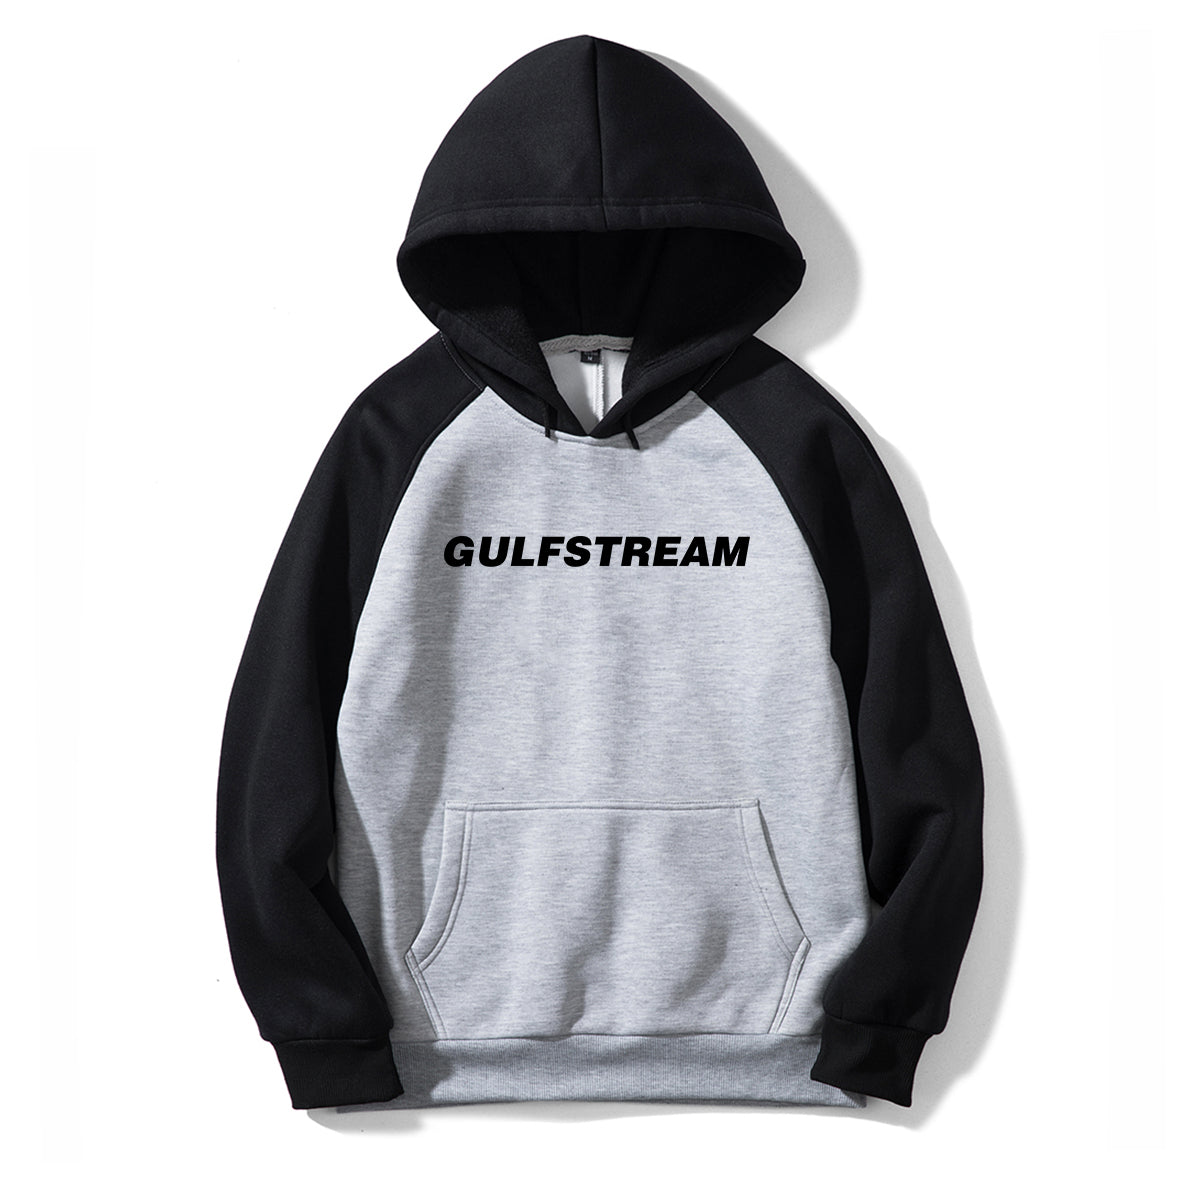 Gulfstream & Text Designed Colourful Hoodies